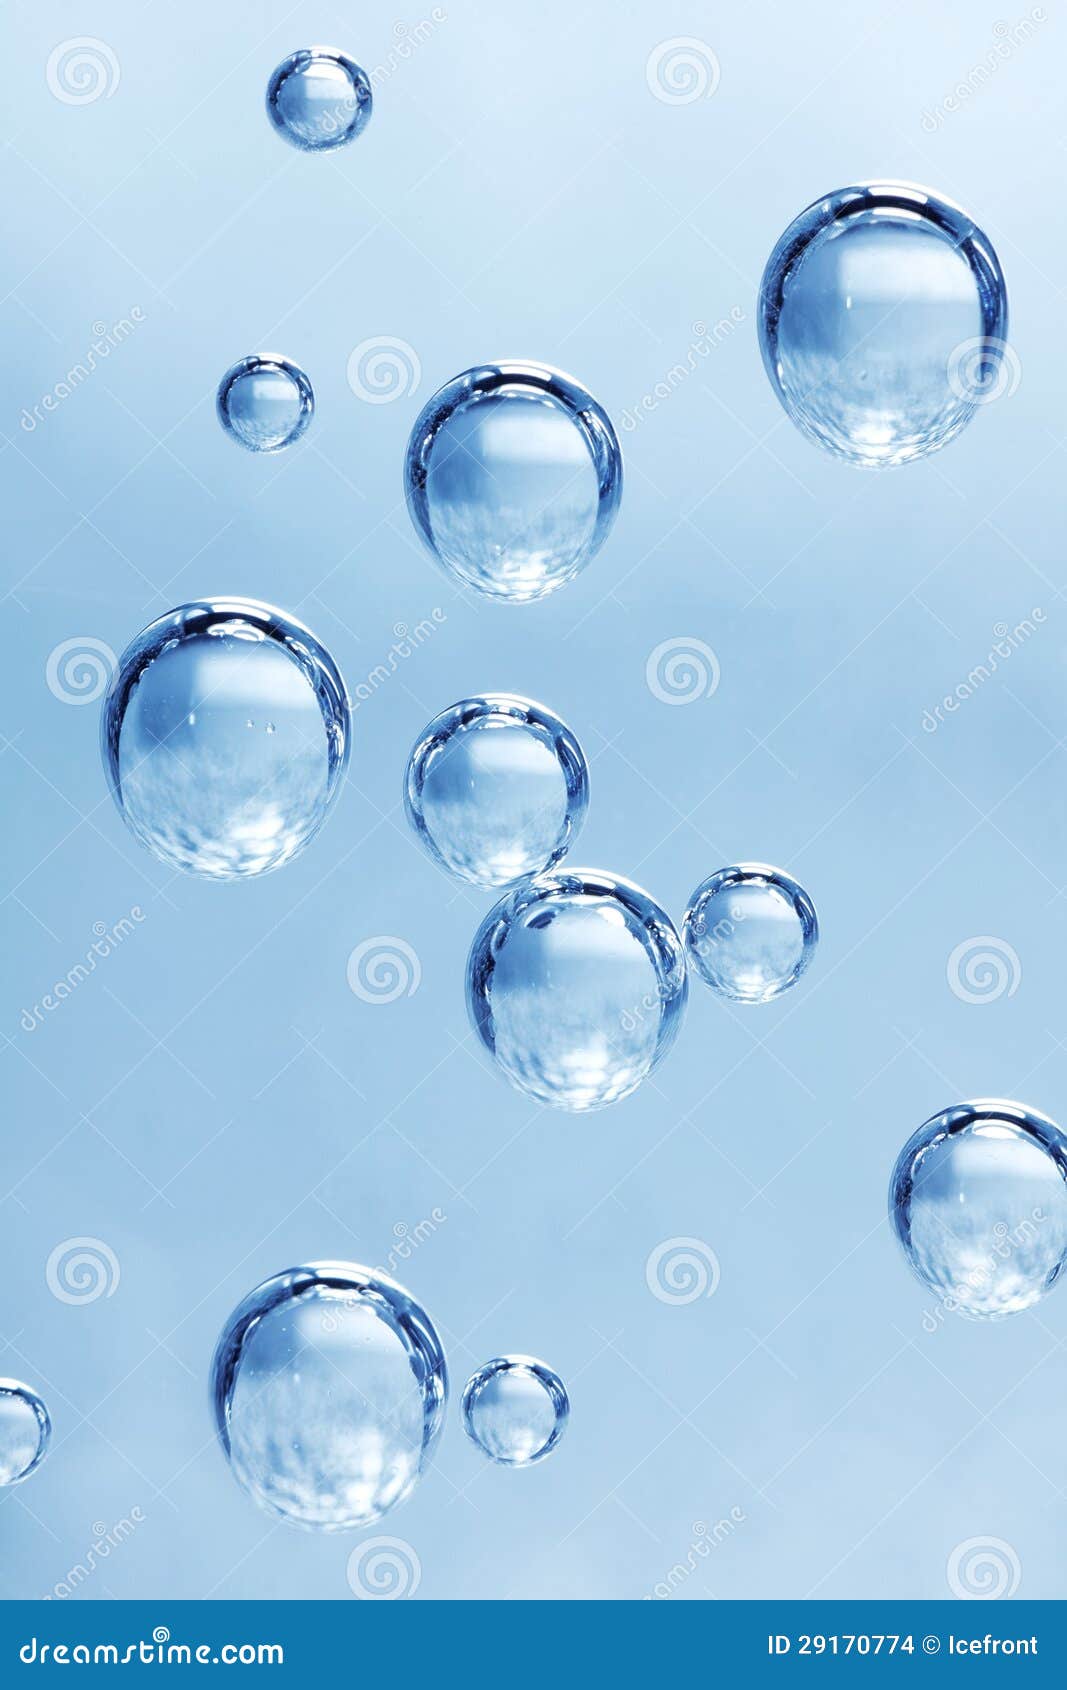 Mineral water bubbles stock photo. Image of bubbles